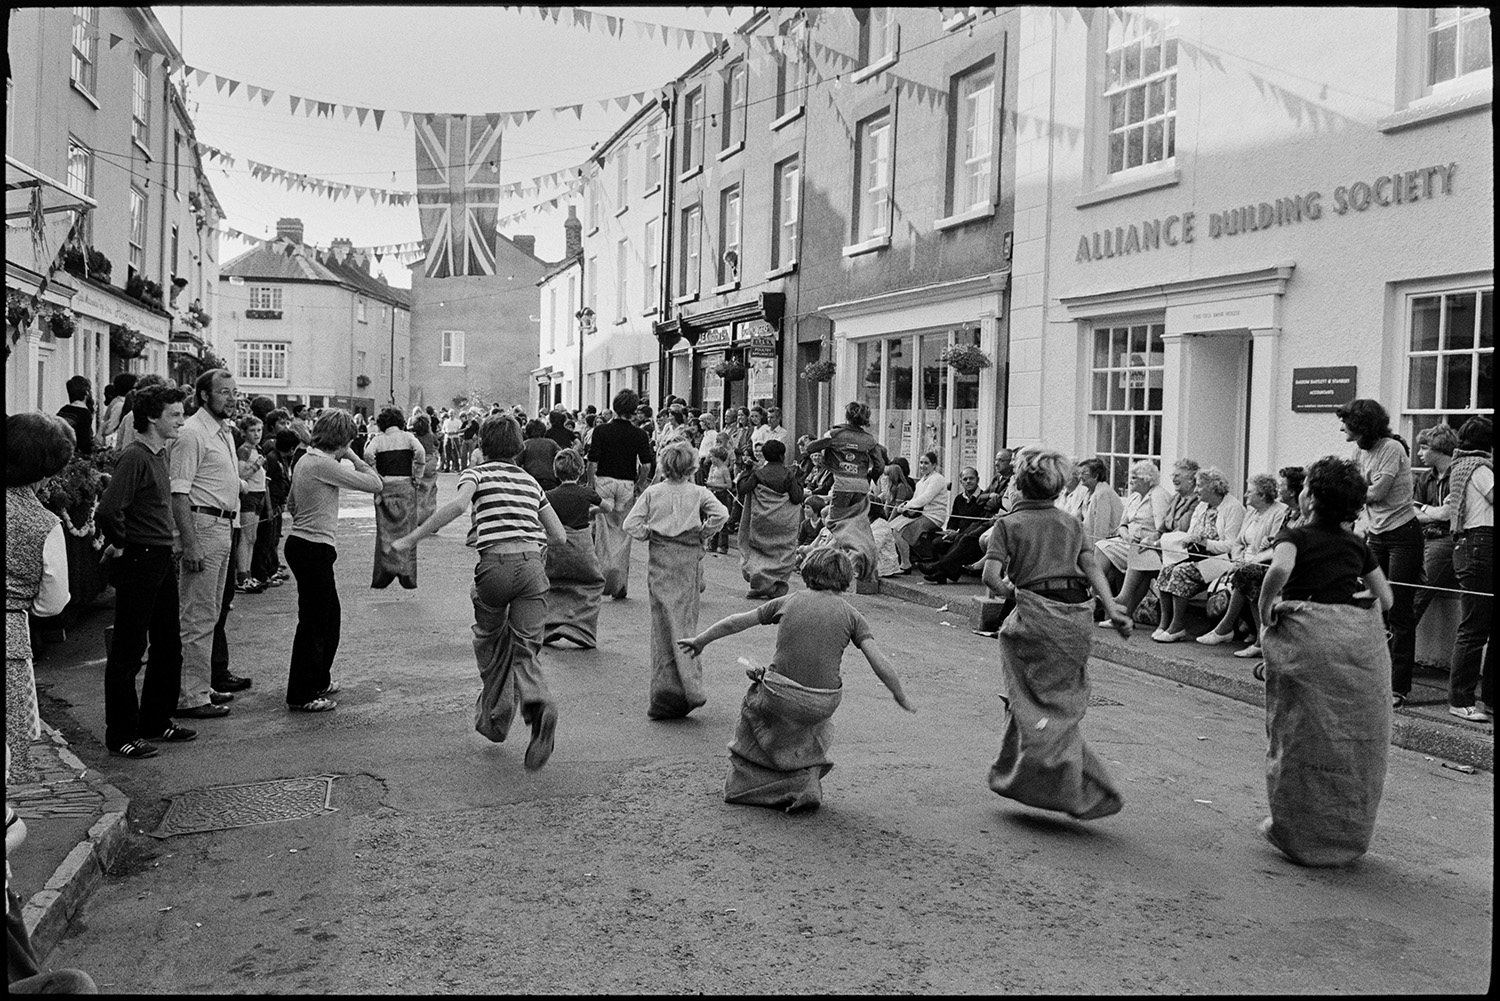 Sack race, eating buns on string in street. 
[Boys taking part in a sack race in a street at Chulmleigh Fair. They are racing past the Alliance Building Society building. People are lining the street to watch the race. Bunting and a Union Jack flag are hung across the street.]